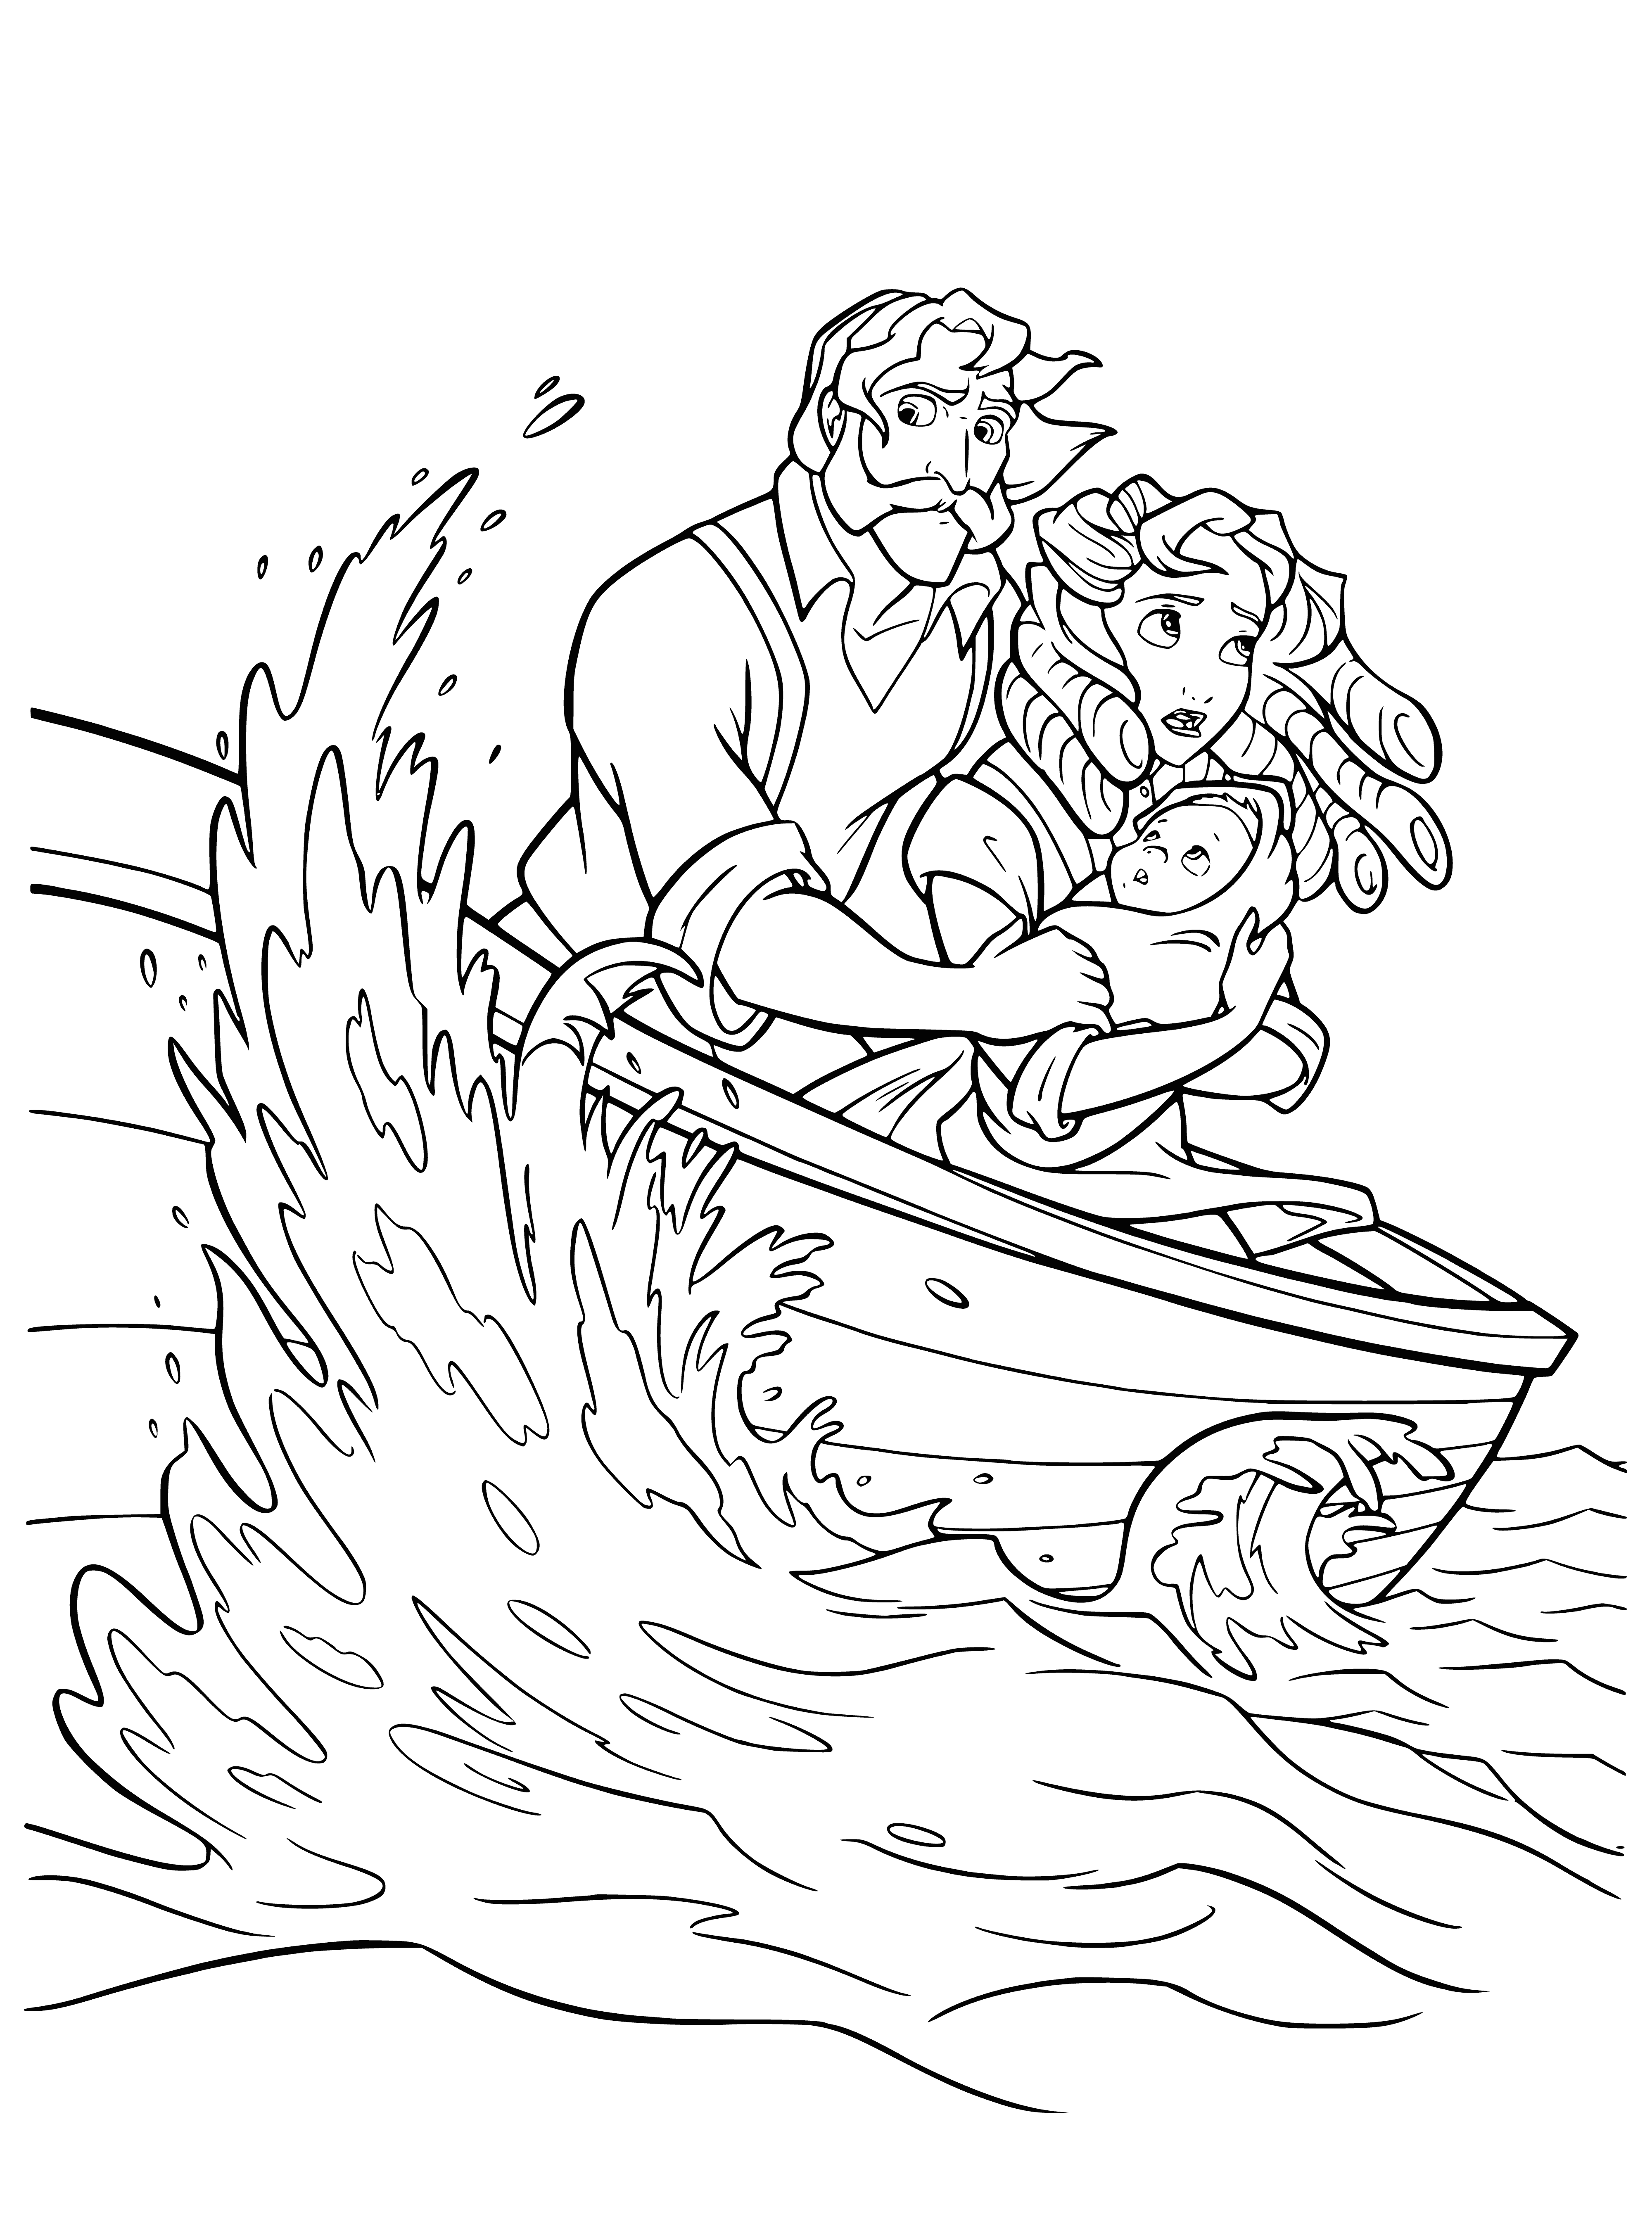 coloring page: A shipwreck coloring page depicting Tarzan's wrecked vessel, with debris and wreckage scattered in the water around it.